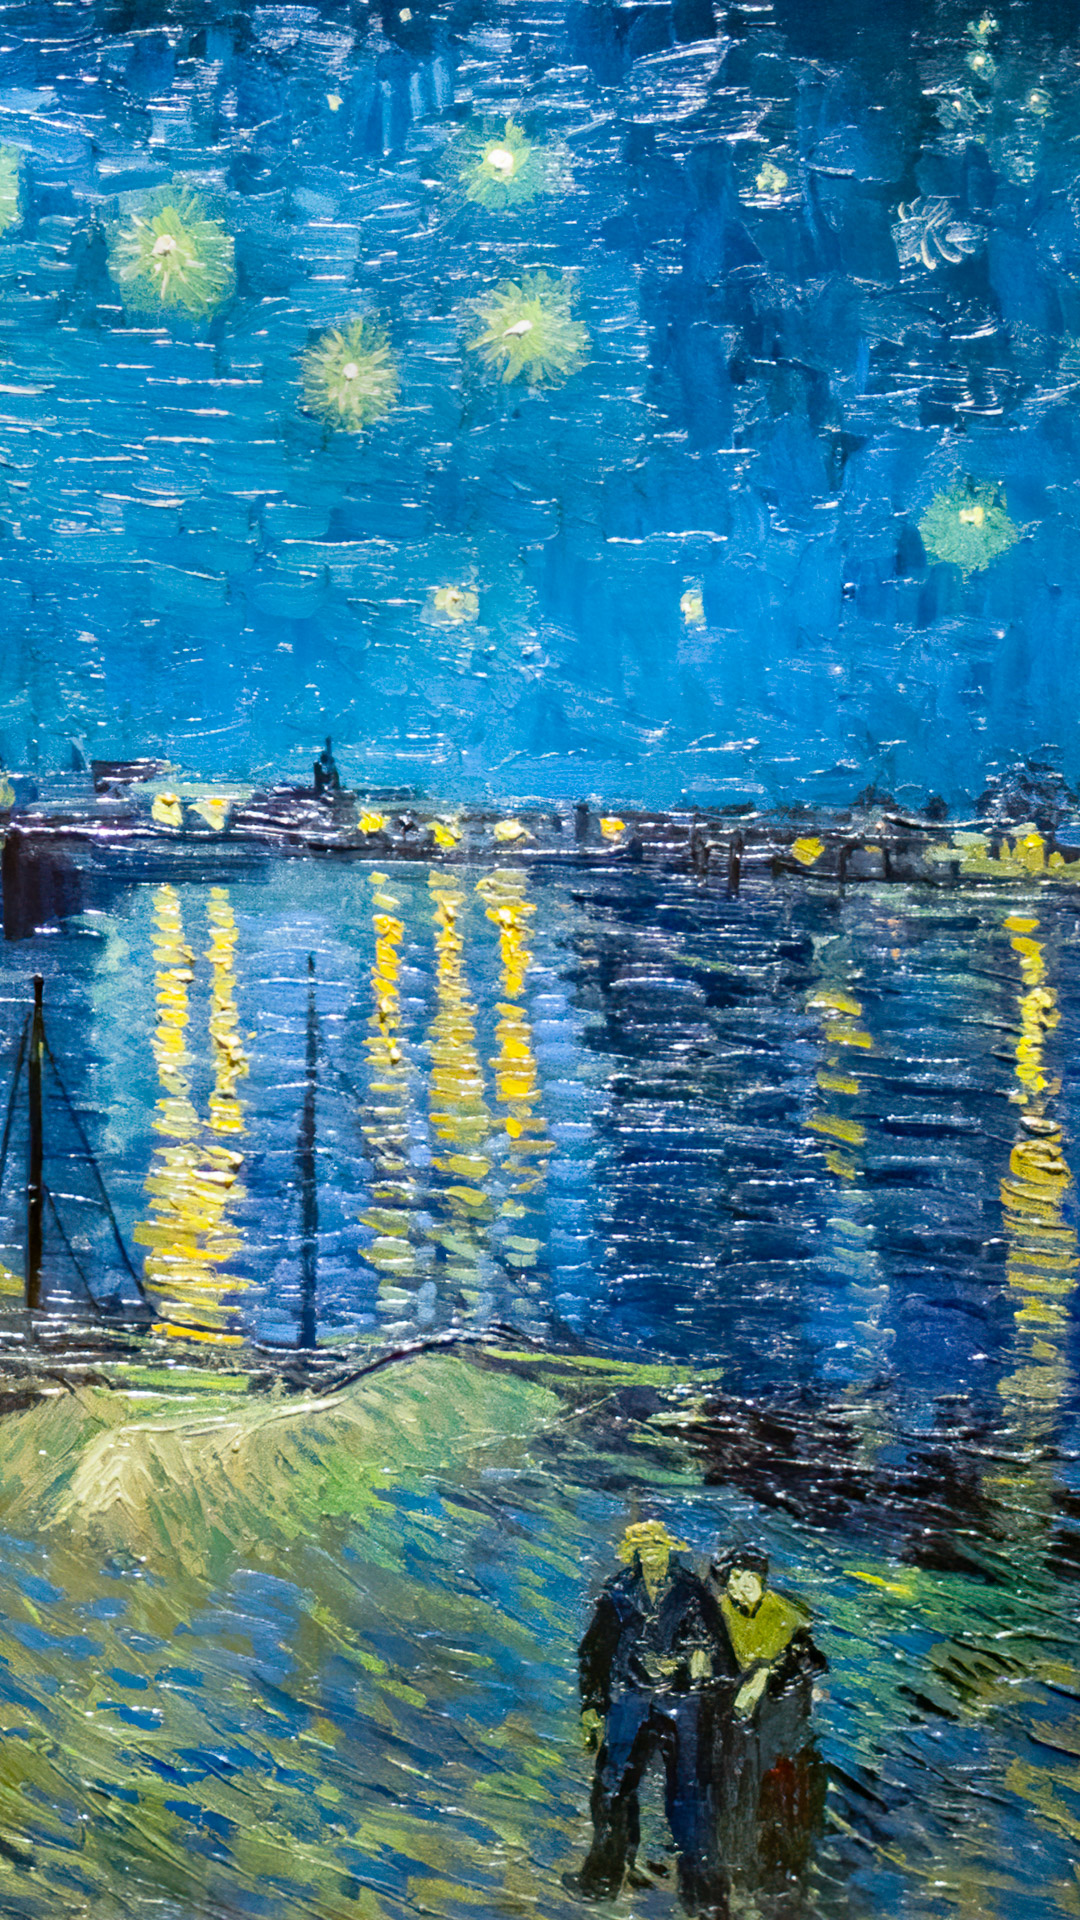 Experience the celestial wonder of van Gogh's Starry Night Over the Rhône wallpaper, as the night sky dances with luminous reflections, adorning your screens with timeless beauty.